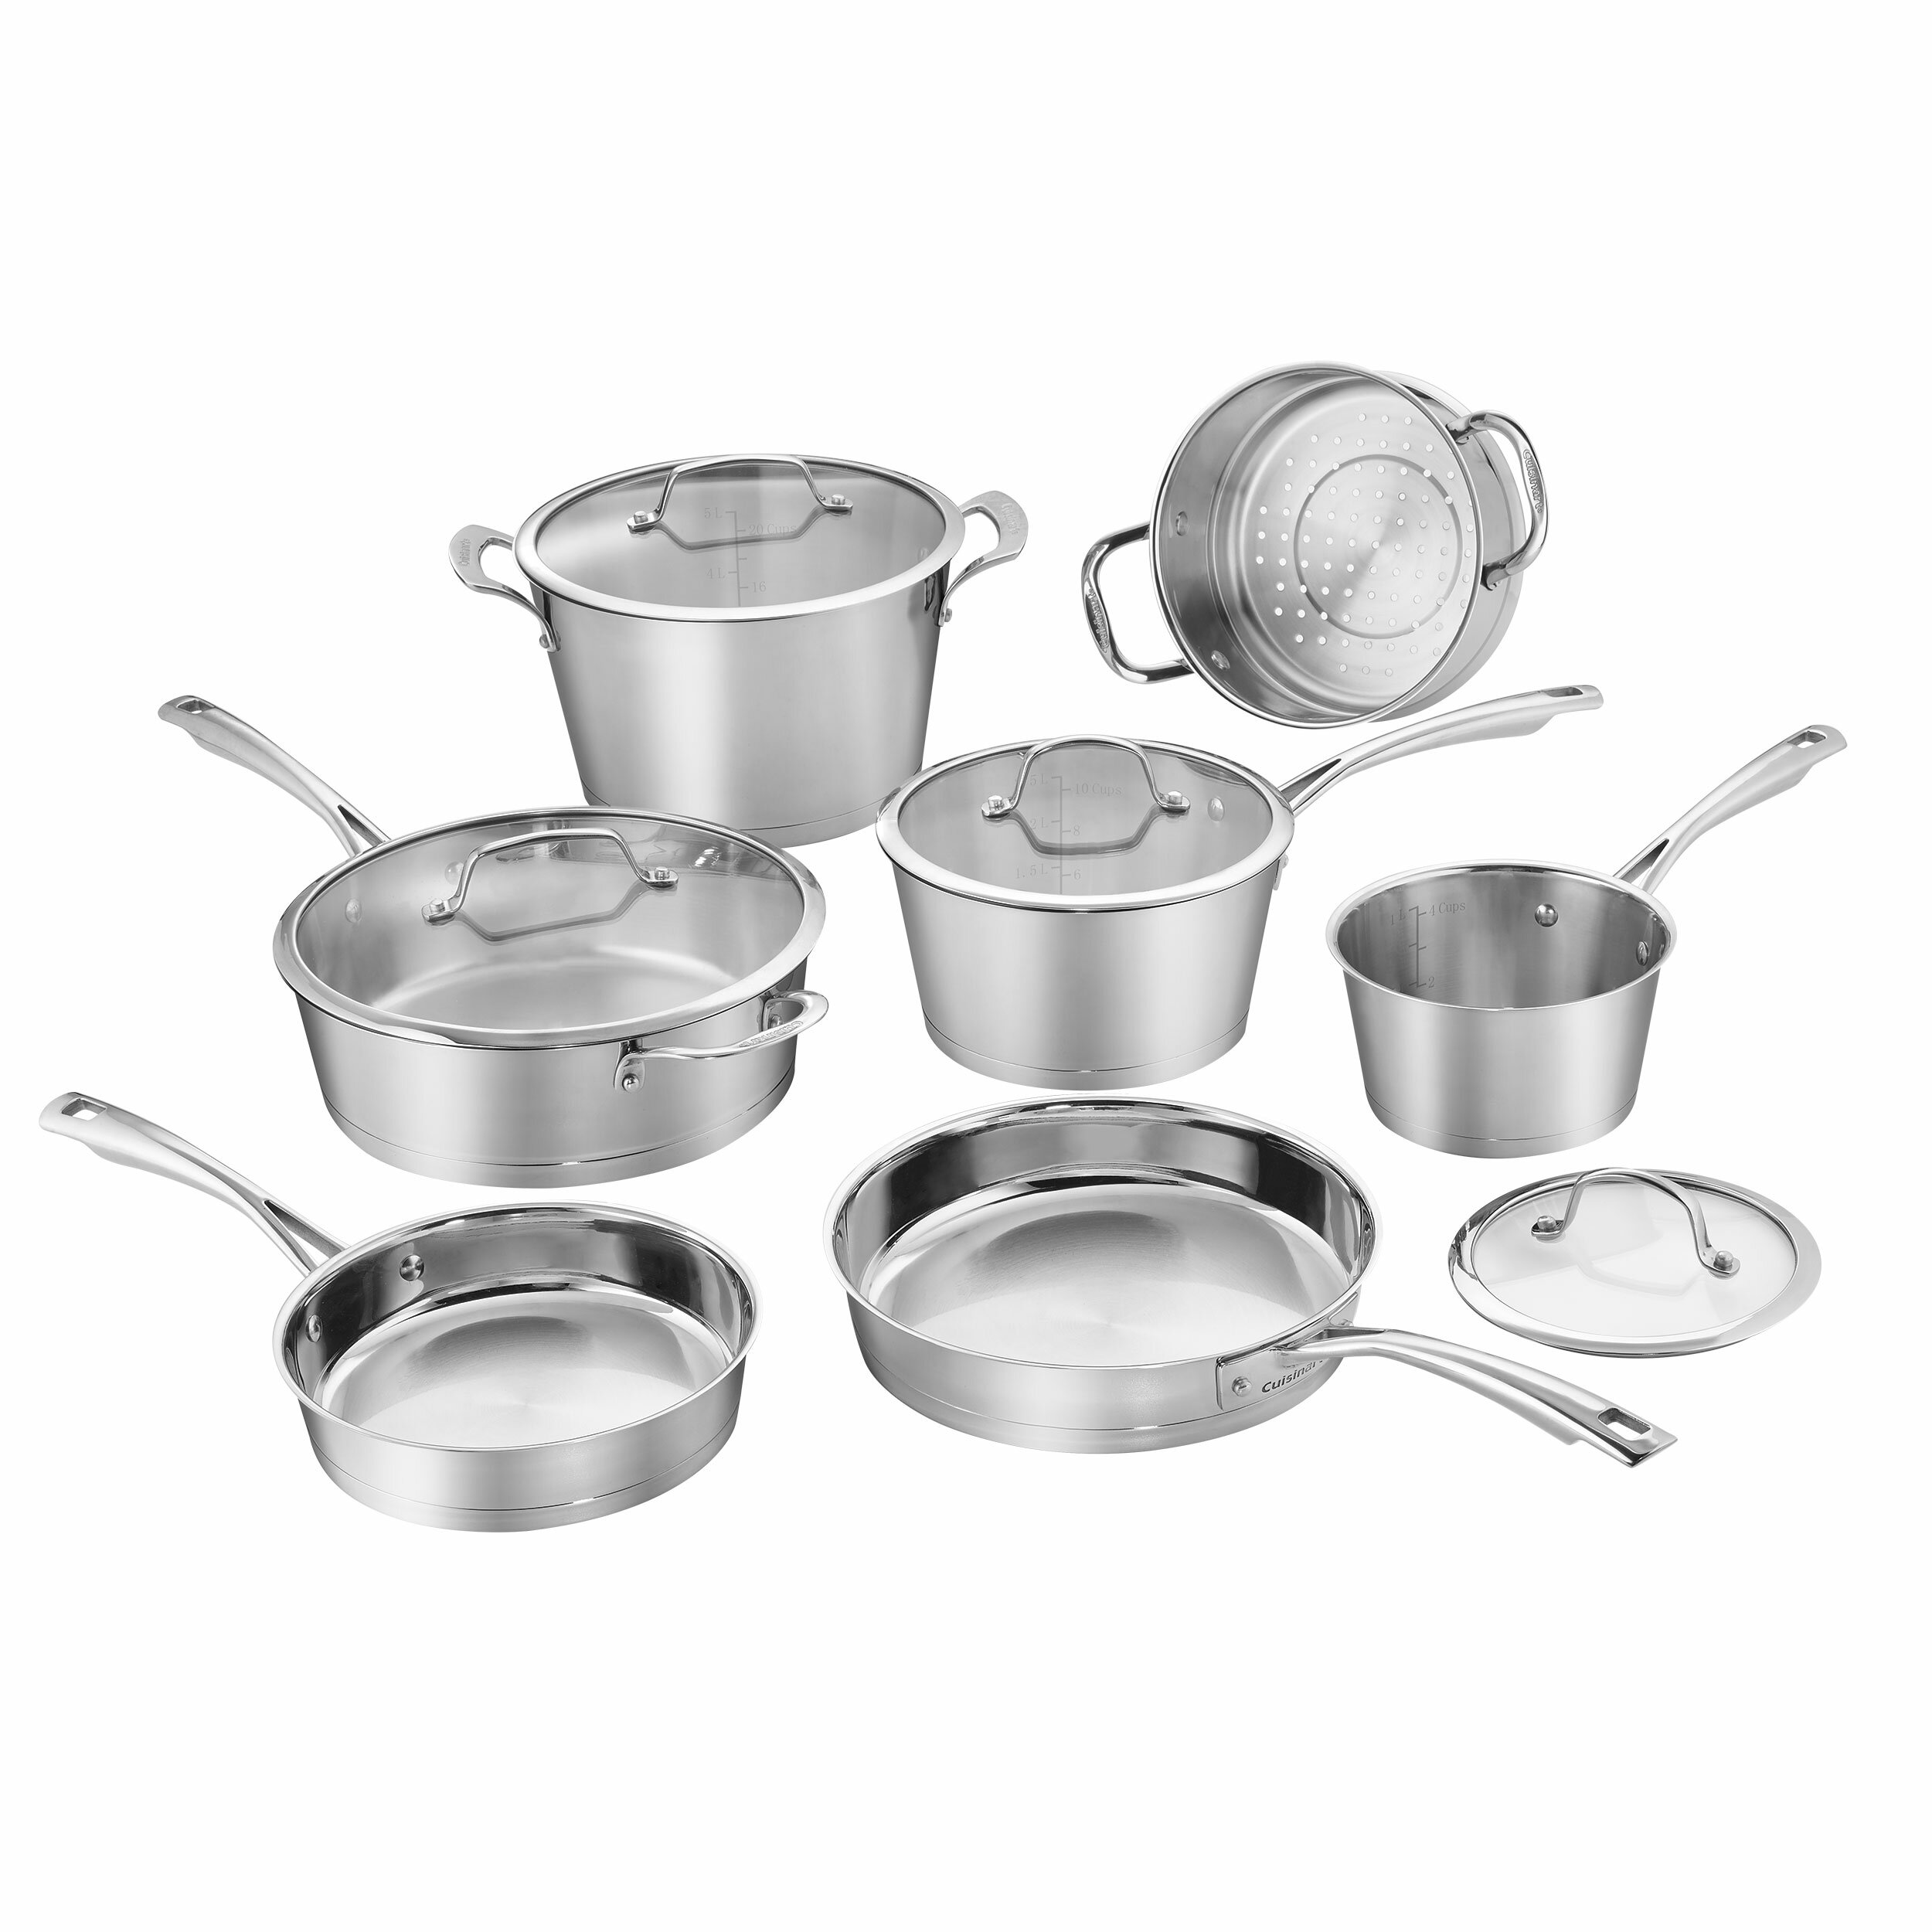 Dishwasher Cuisinart 11-Piece Stainless Steel Cookware Set Induction Oven Safe 